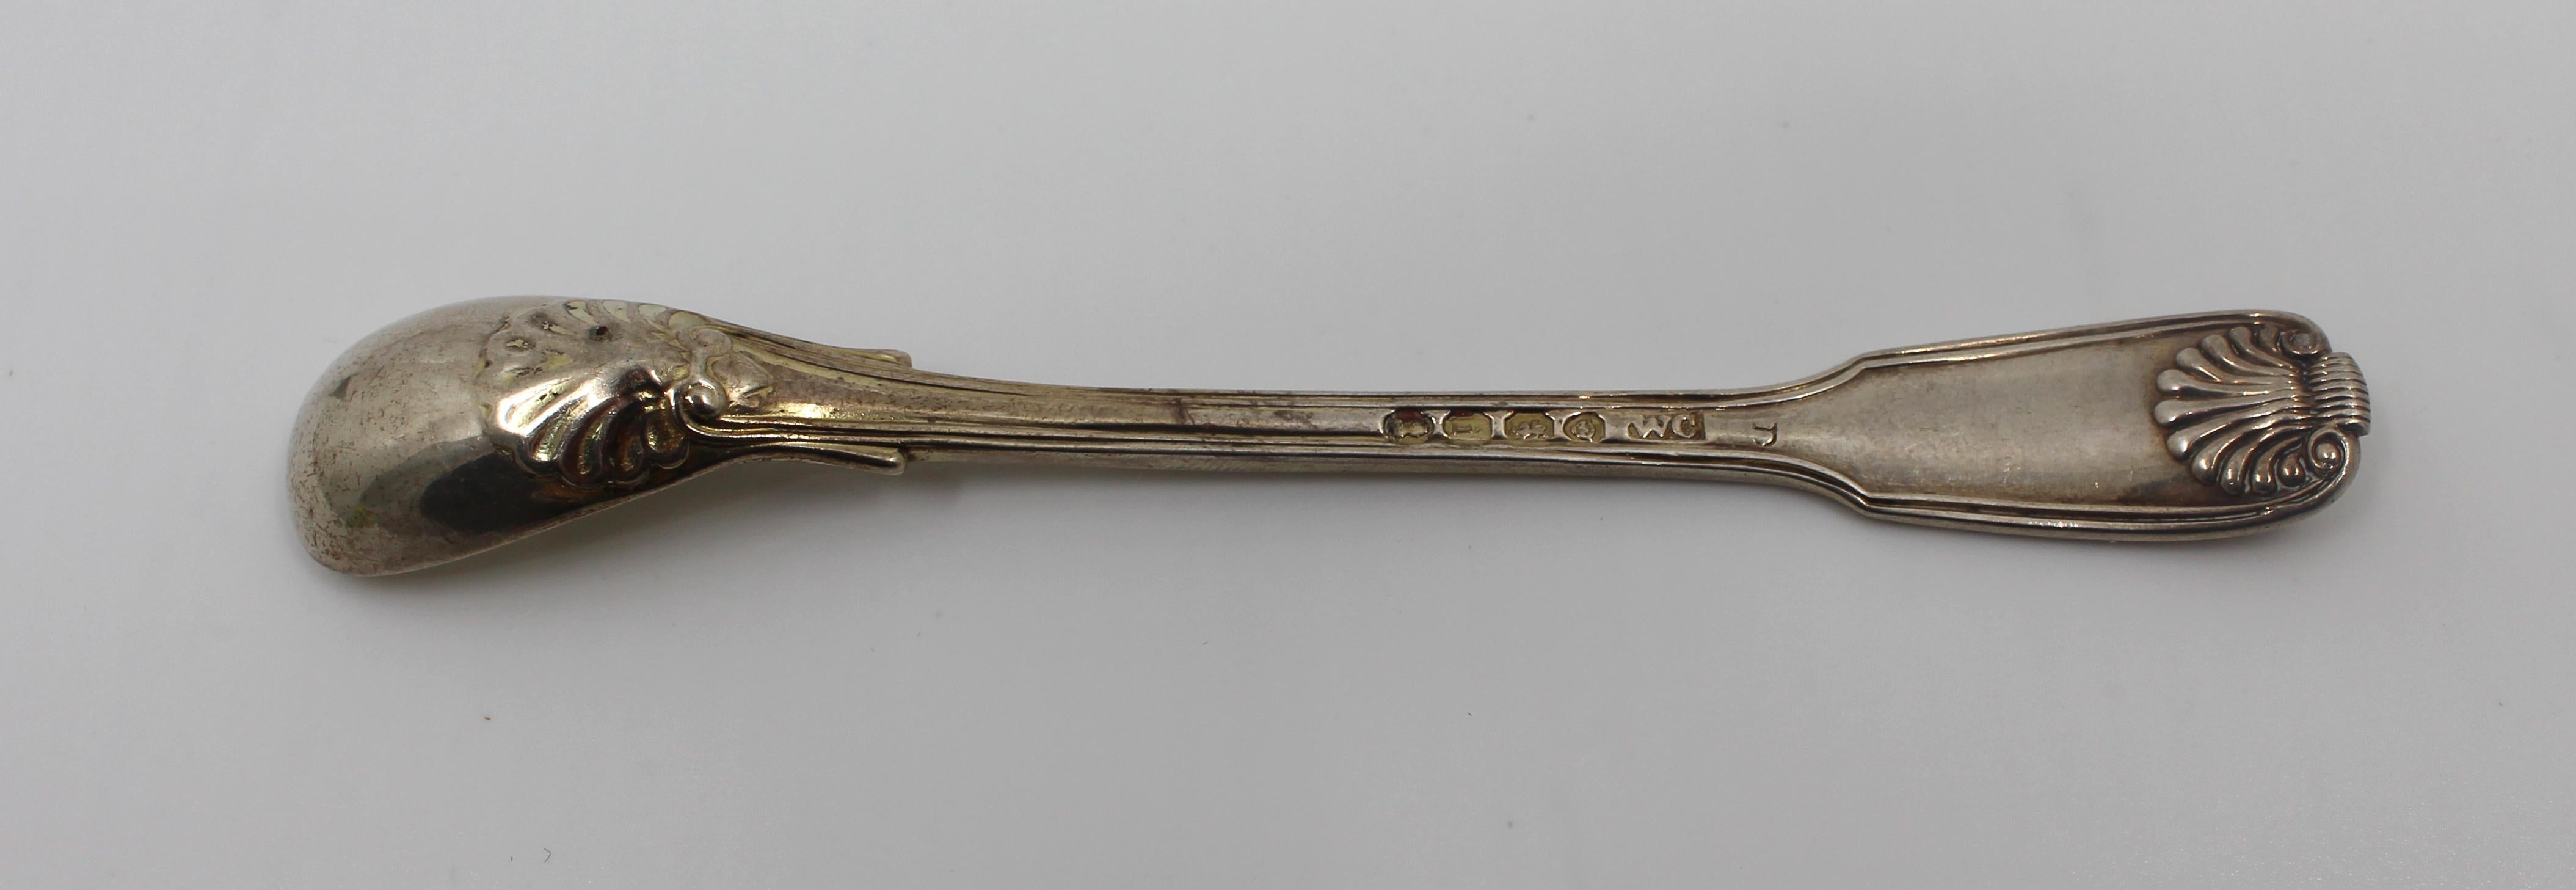 Solid Silver Crested Mustard Spoon by William Chawner London 1824 For Sale 1